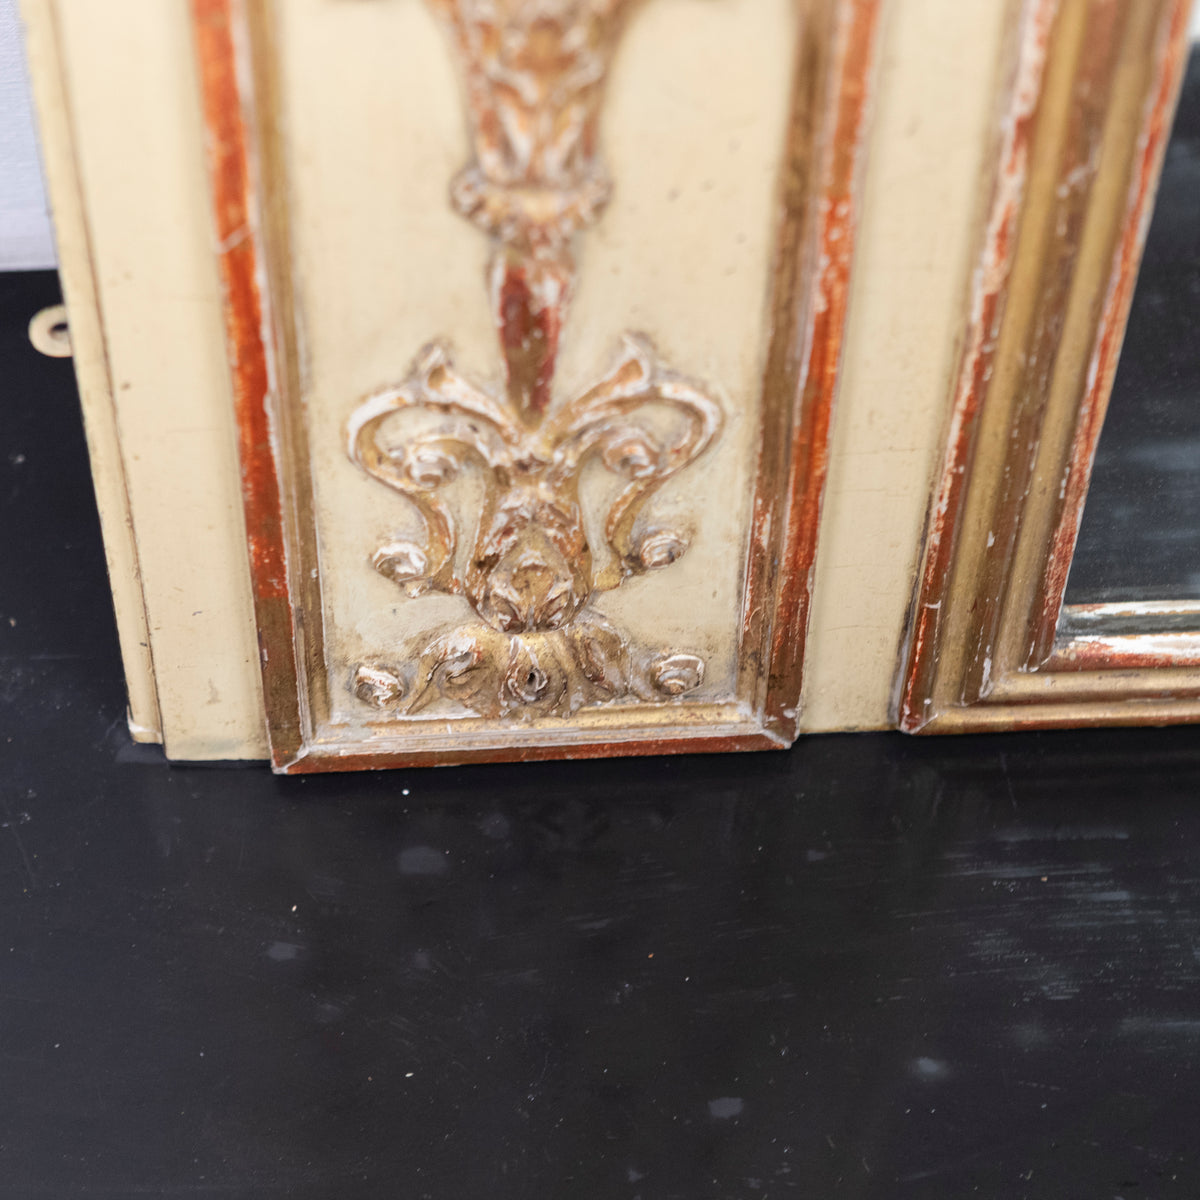 Large Louis XVI Trumeau Mirror with Oil Painting and Gilt Gesso Details | The Architectural Forum